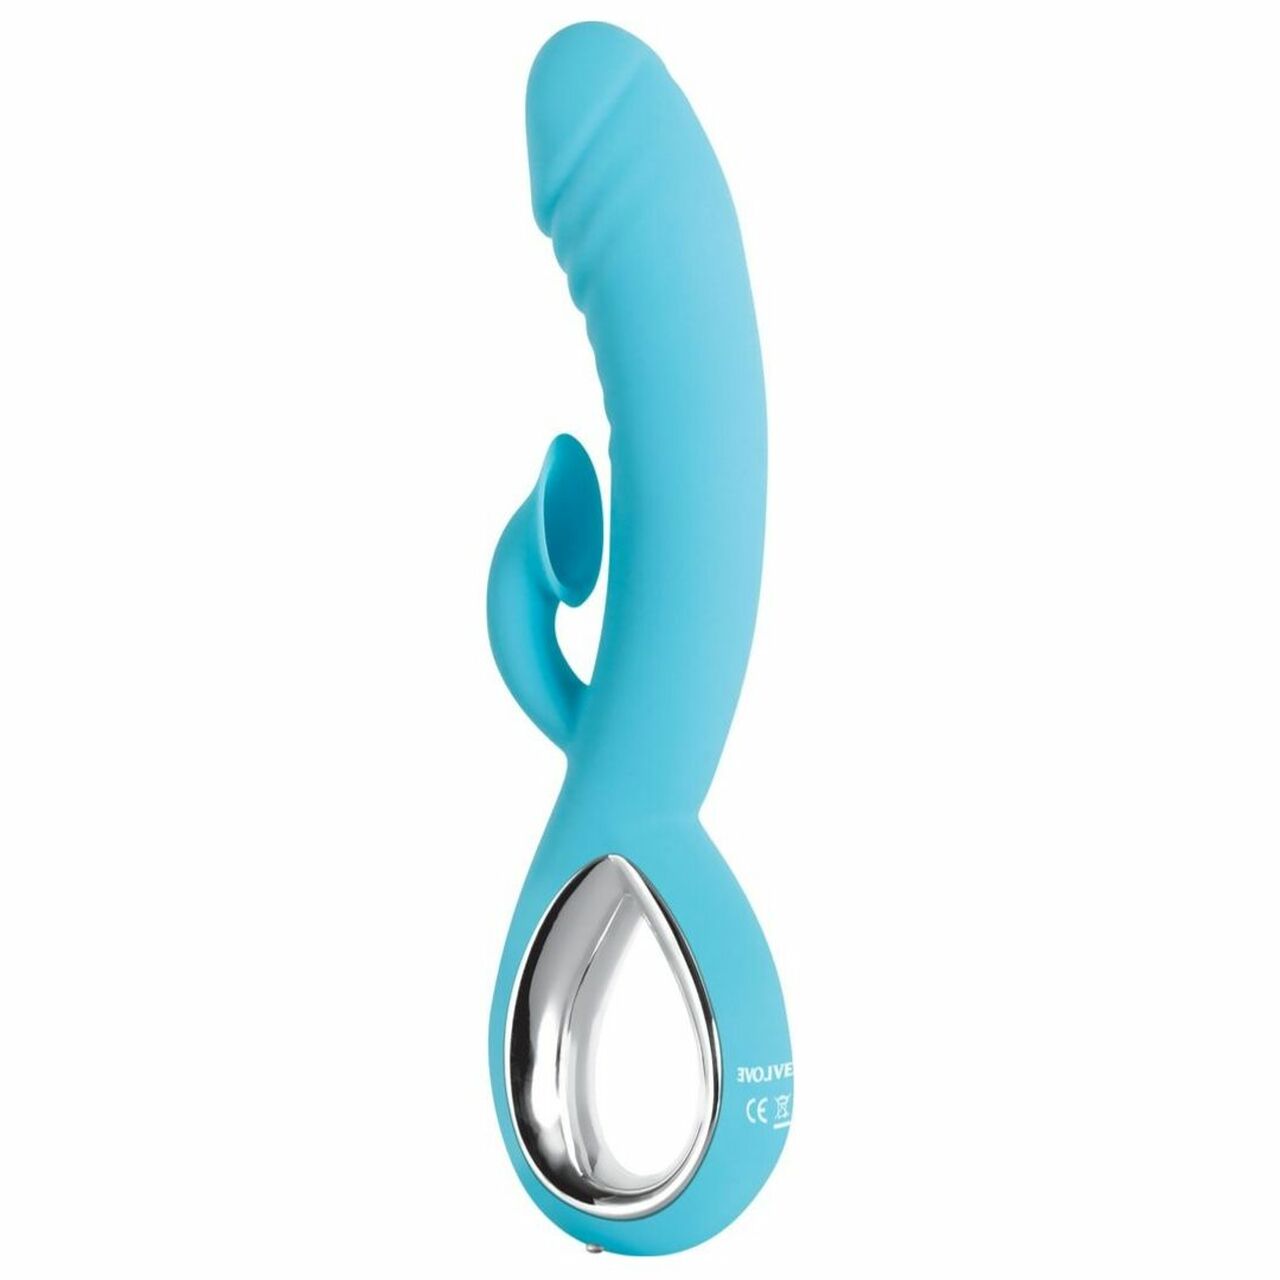 Triple+Infinity+Rechargeable+Silicone+Heated+Dual+Vibrator+With+Clitoral+Suction+Stimulator